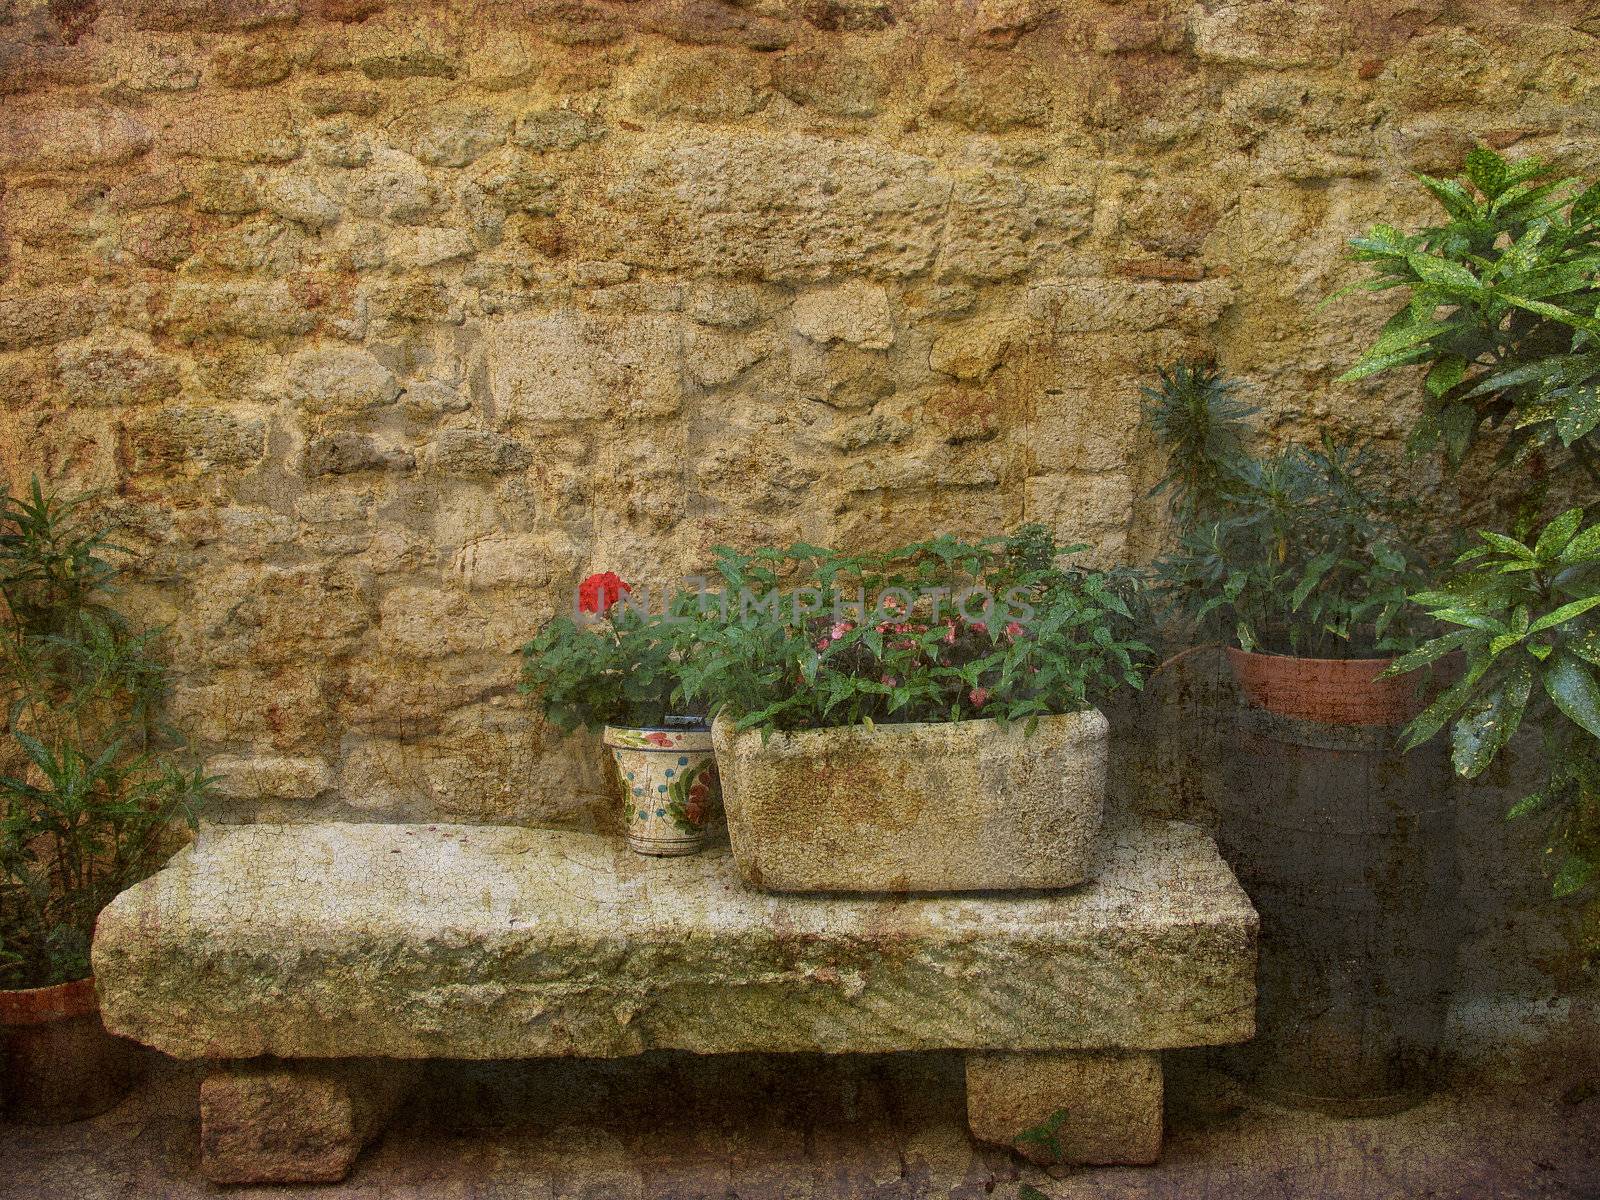 Nice old French patio - Provence. More of my images worked together to reflect age time and age. Space for text.